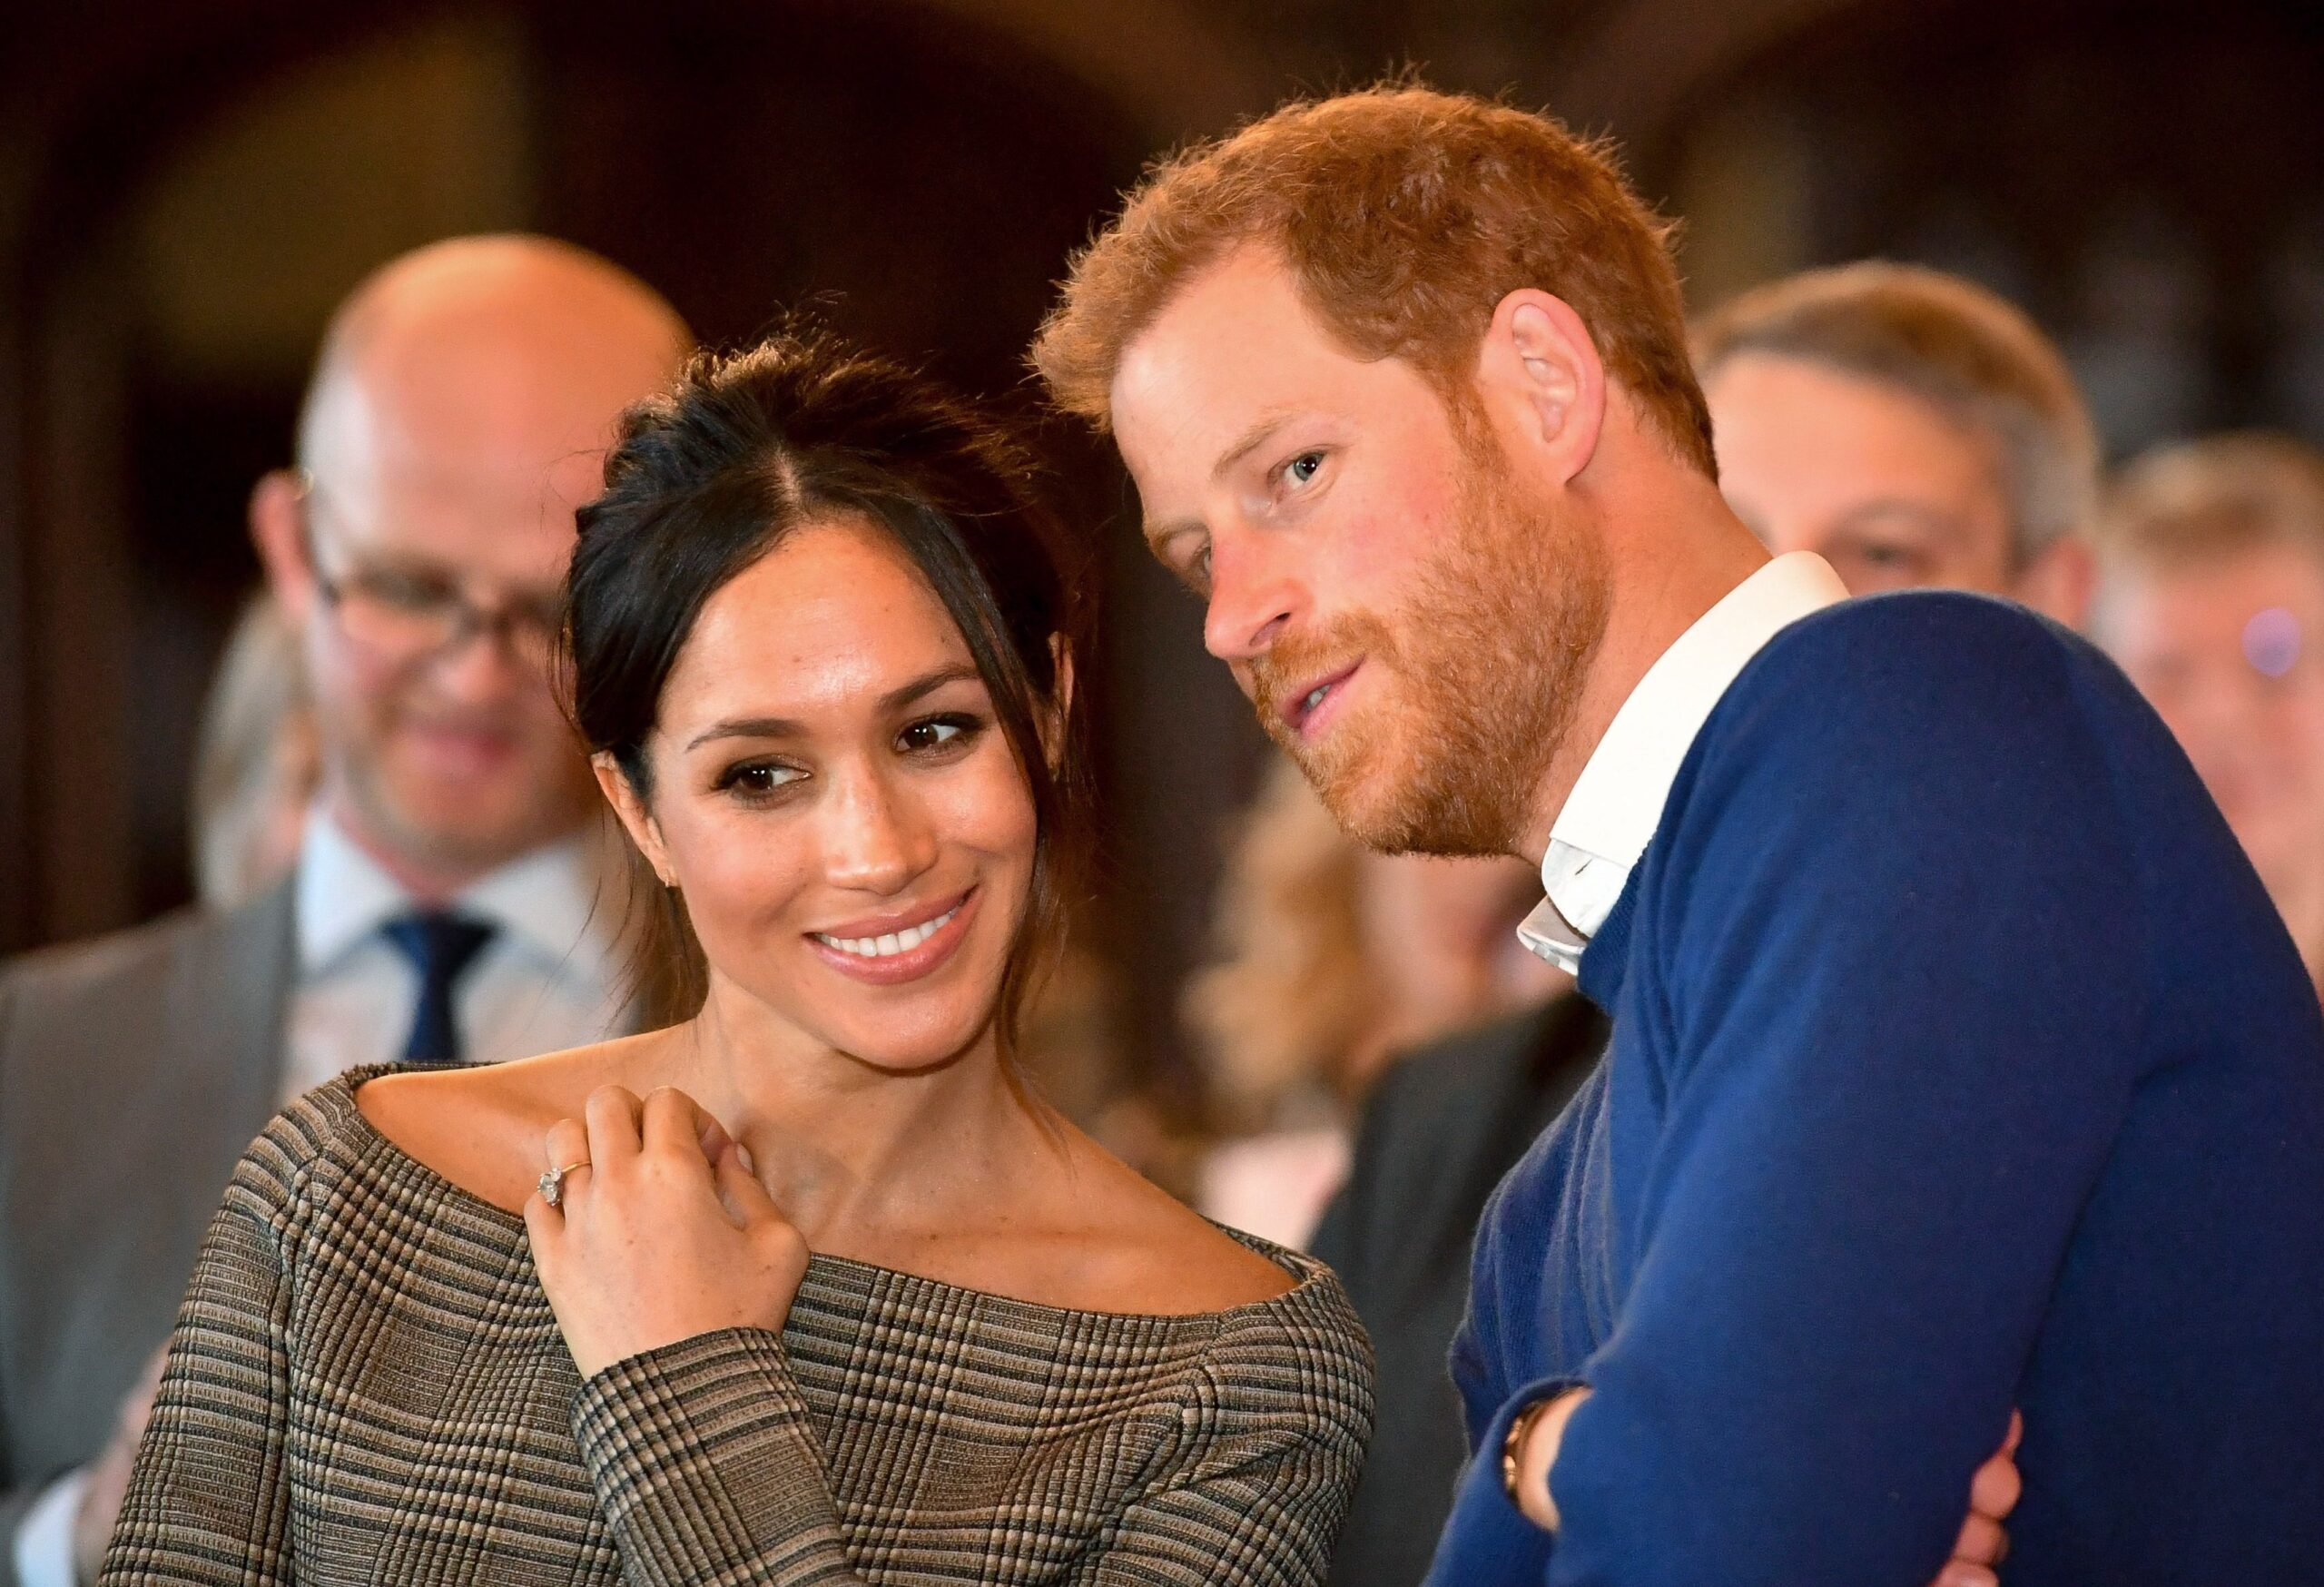 Five ways the Royal Family have subtly hit back at Harry and Meghan’s claims